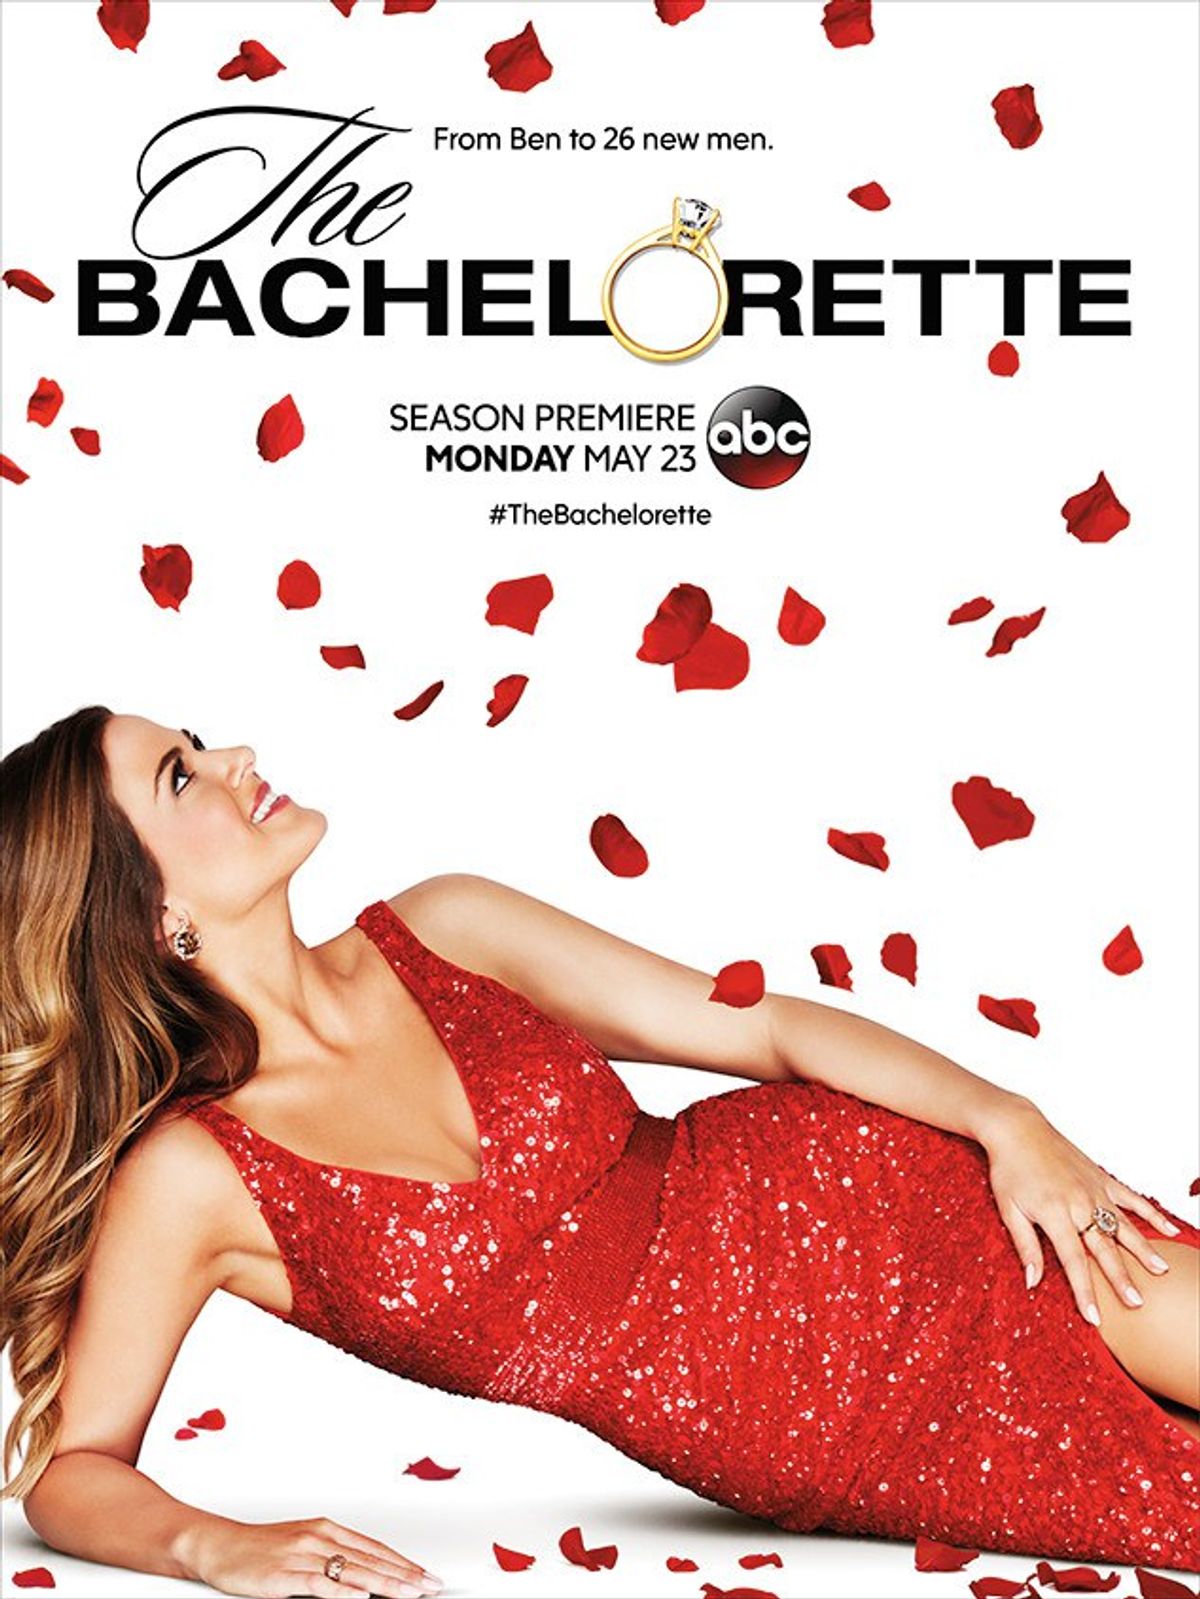 33 Thoughts From 'The Bachelorette' Premiere